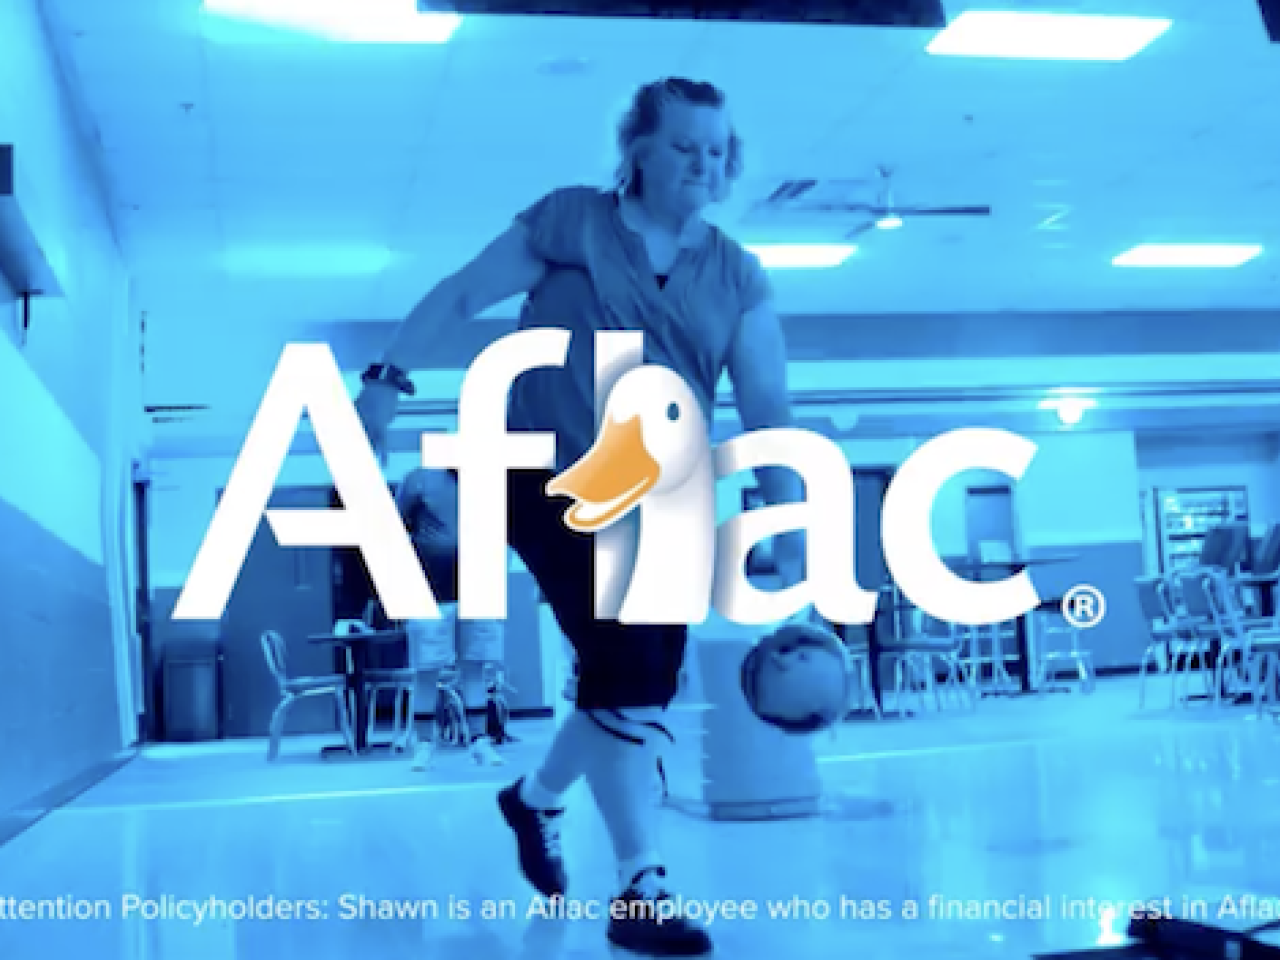 Nikki Cannon shown bowling. Aflac logo and duck are shown.